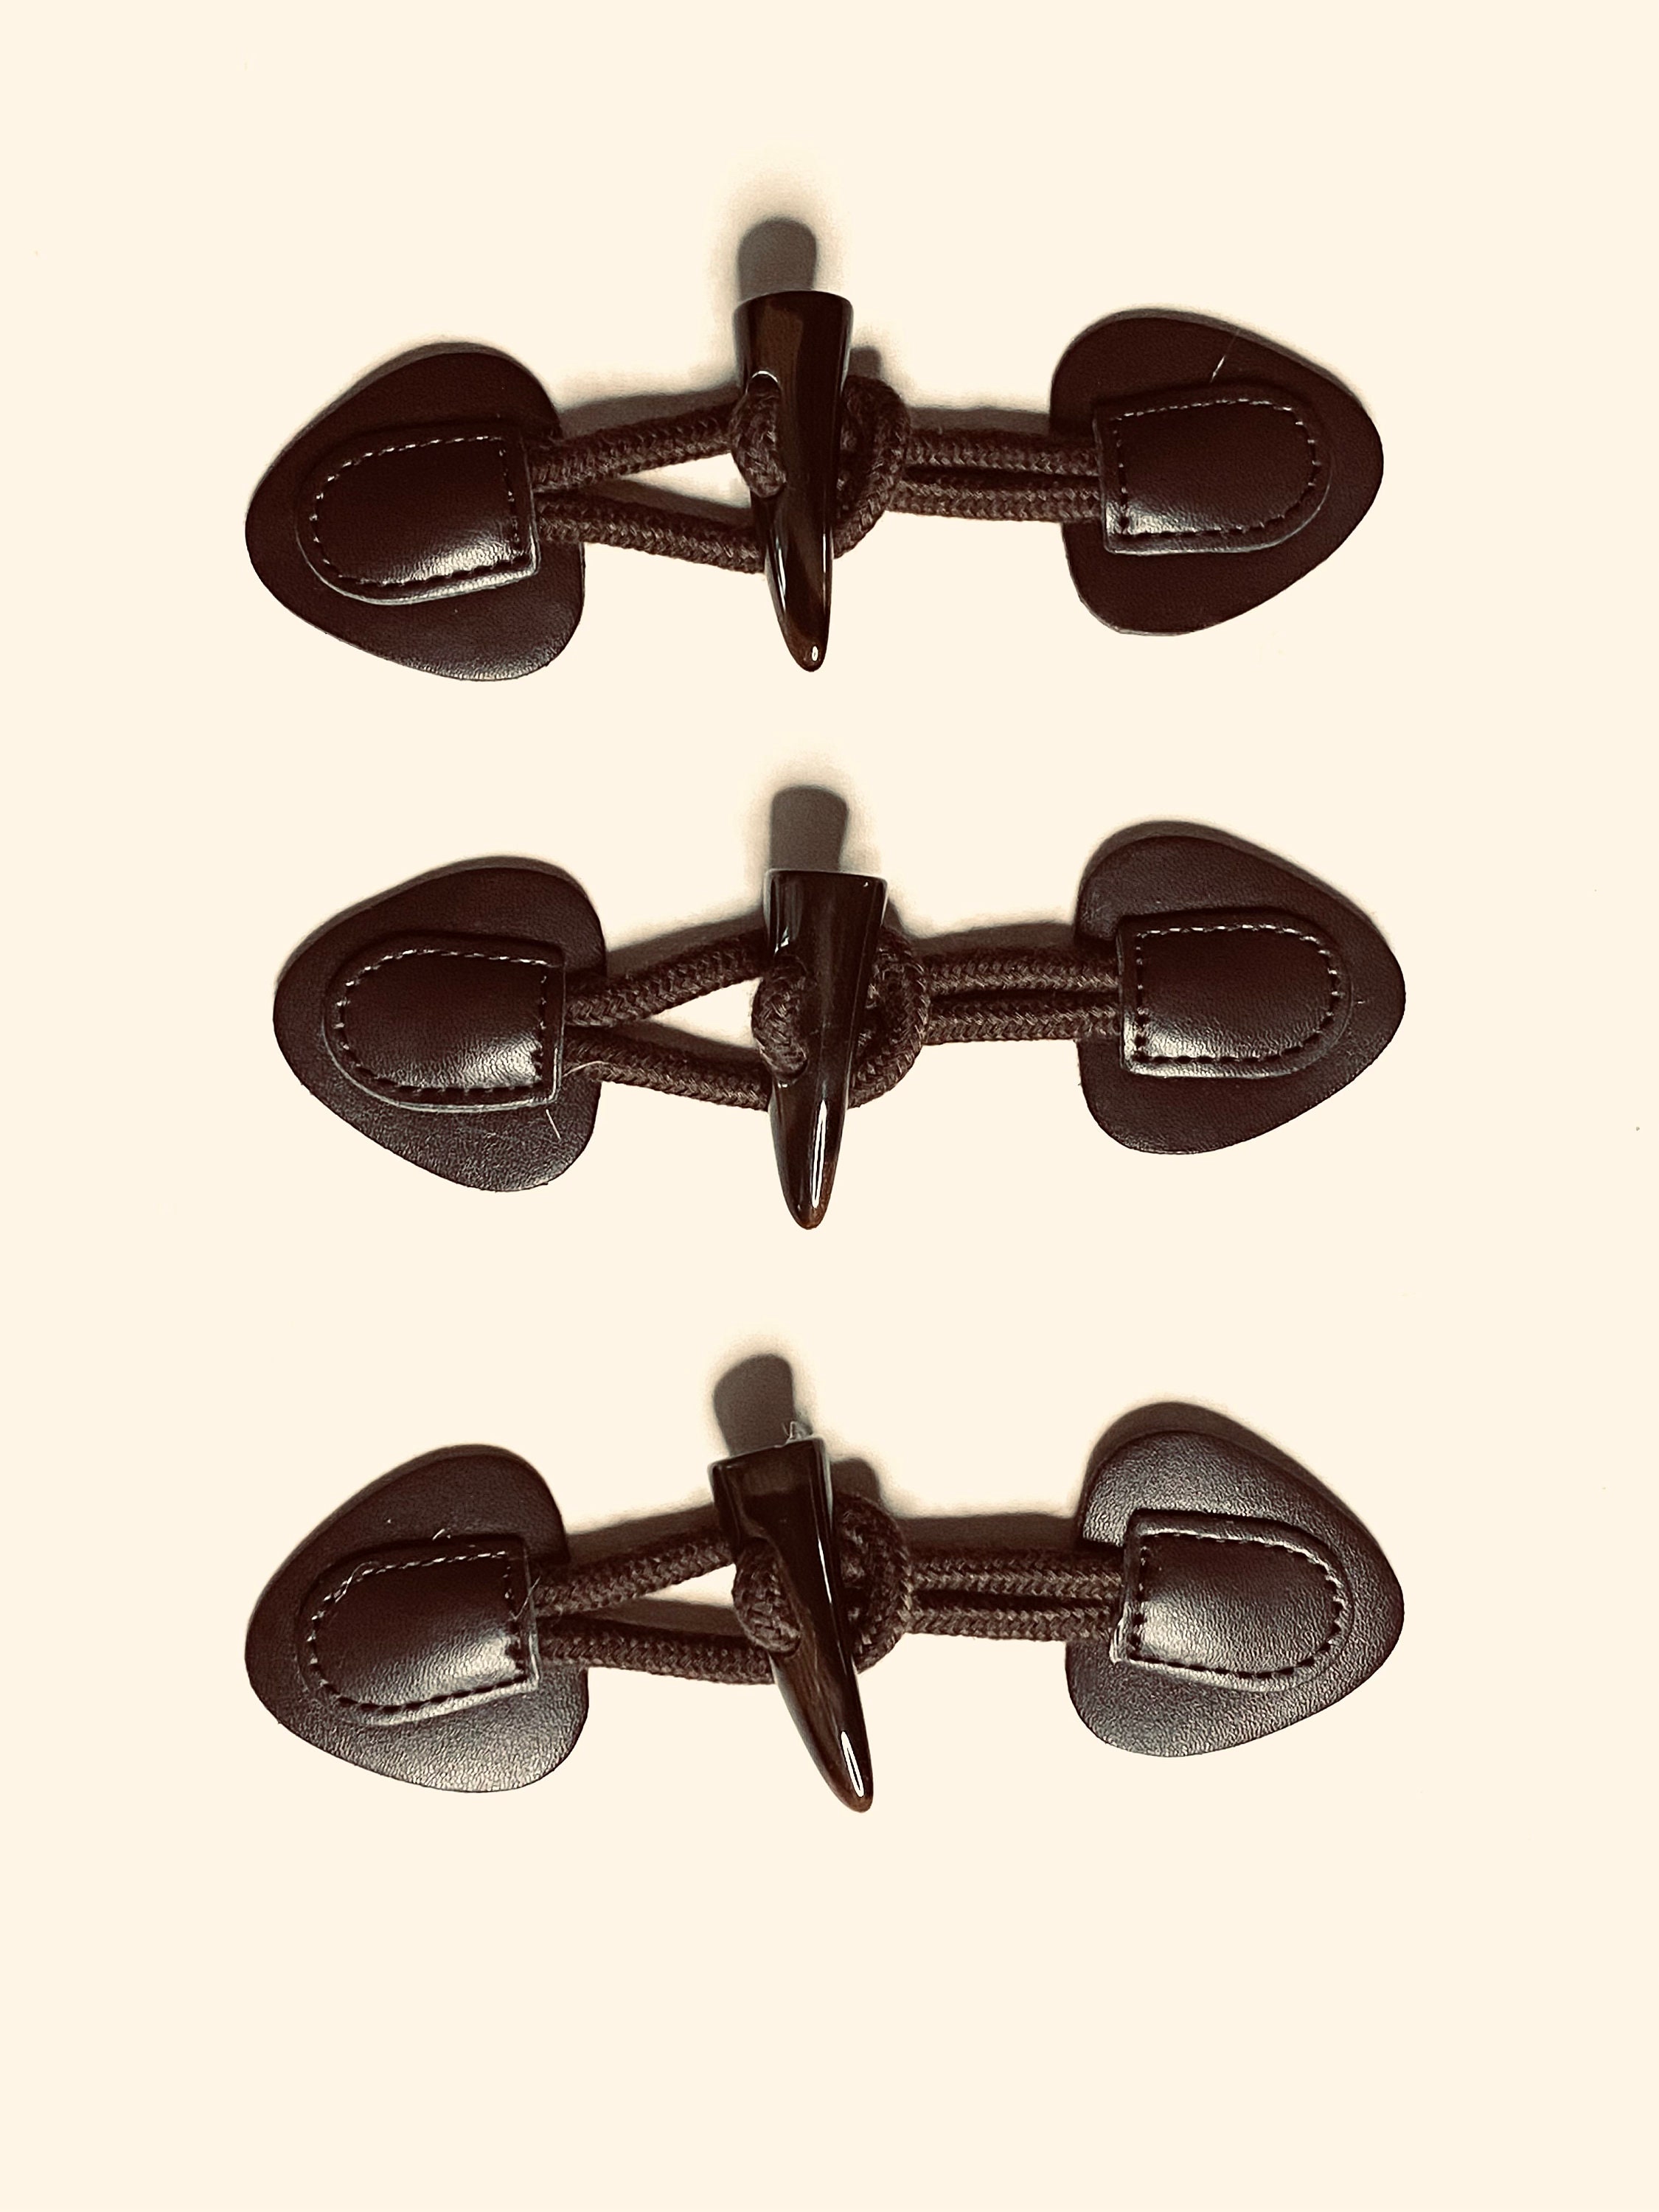  ABOOFAN 4 Pairs Buckle Duffle Coat Buttons Toggle Buttons for  Coats DIY Button Accessories Snap Toggle Closure Buttons Clothes Closure  Buttons Toggle Buttons Sew on Metal Zinc Alloy Cloak